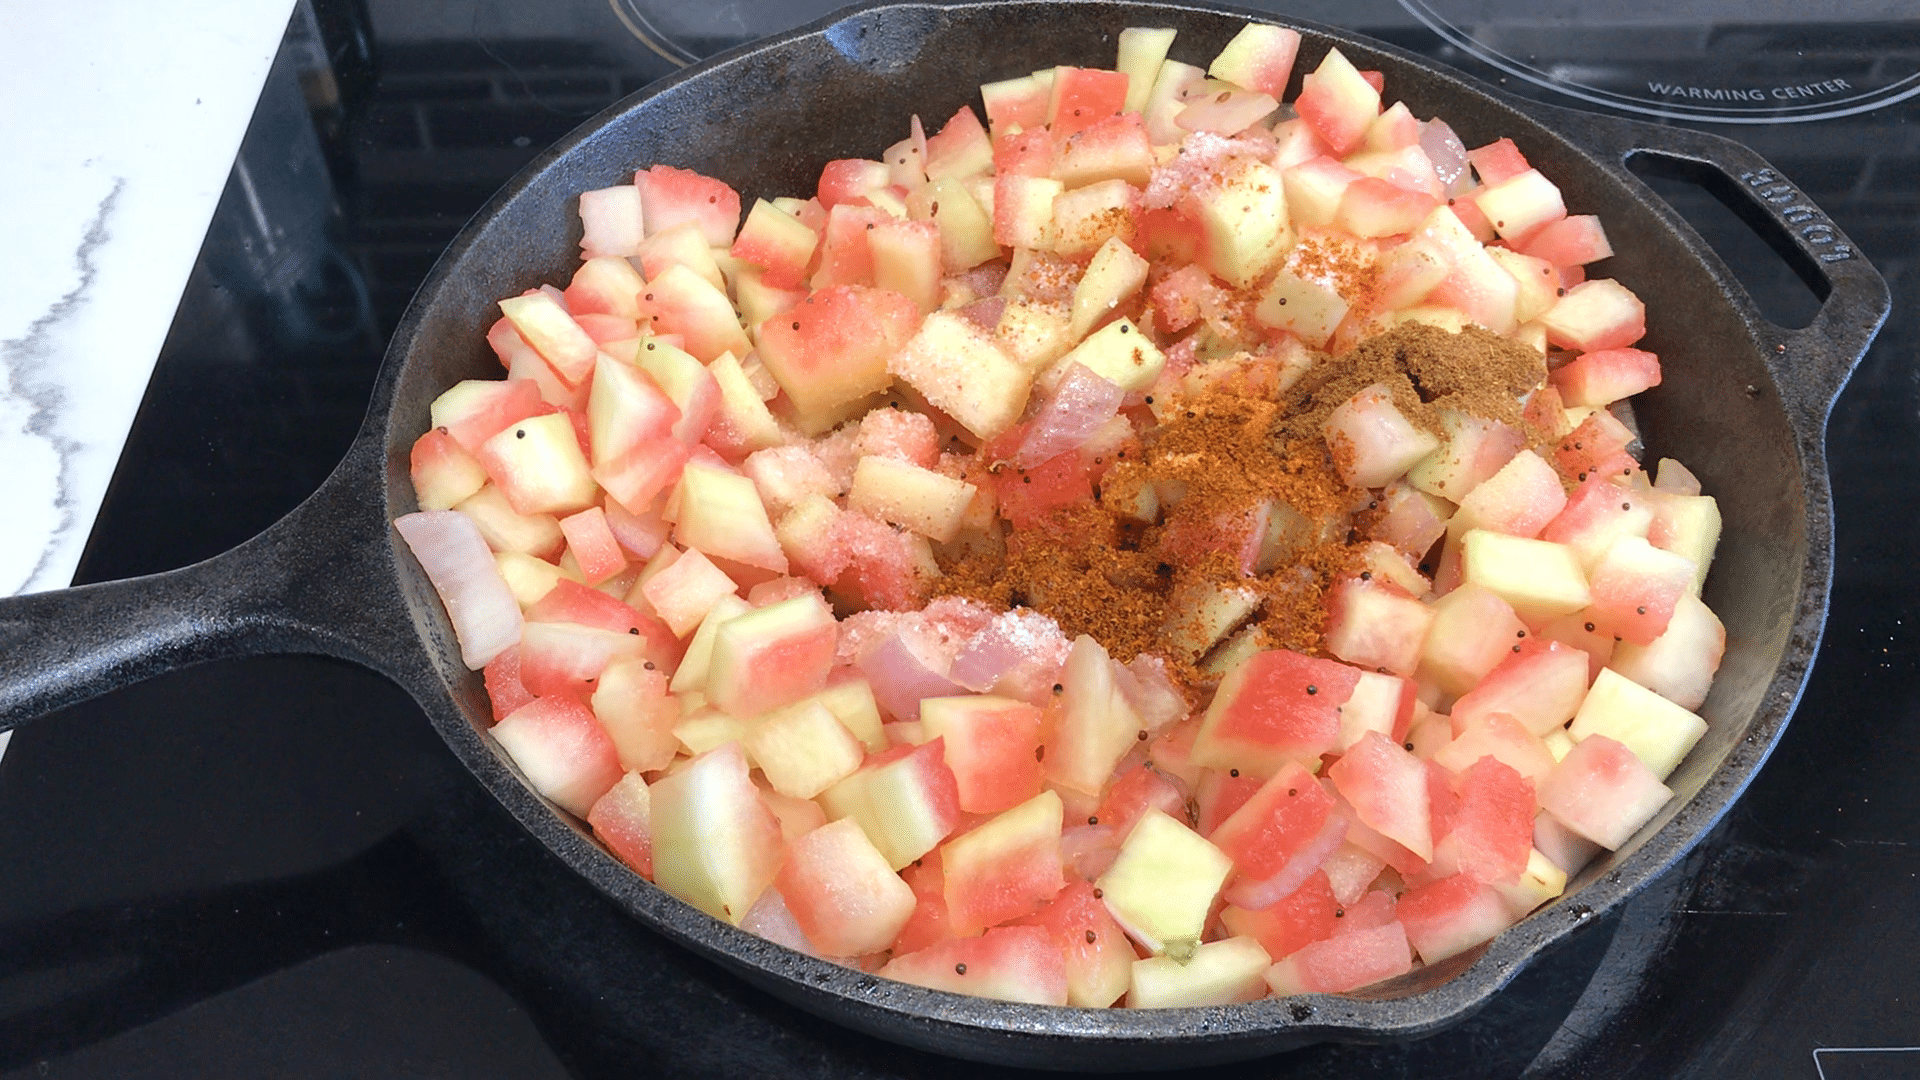 A pan filled with food, with Curry and Watermelon